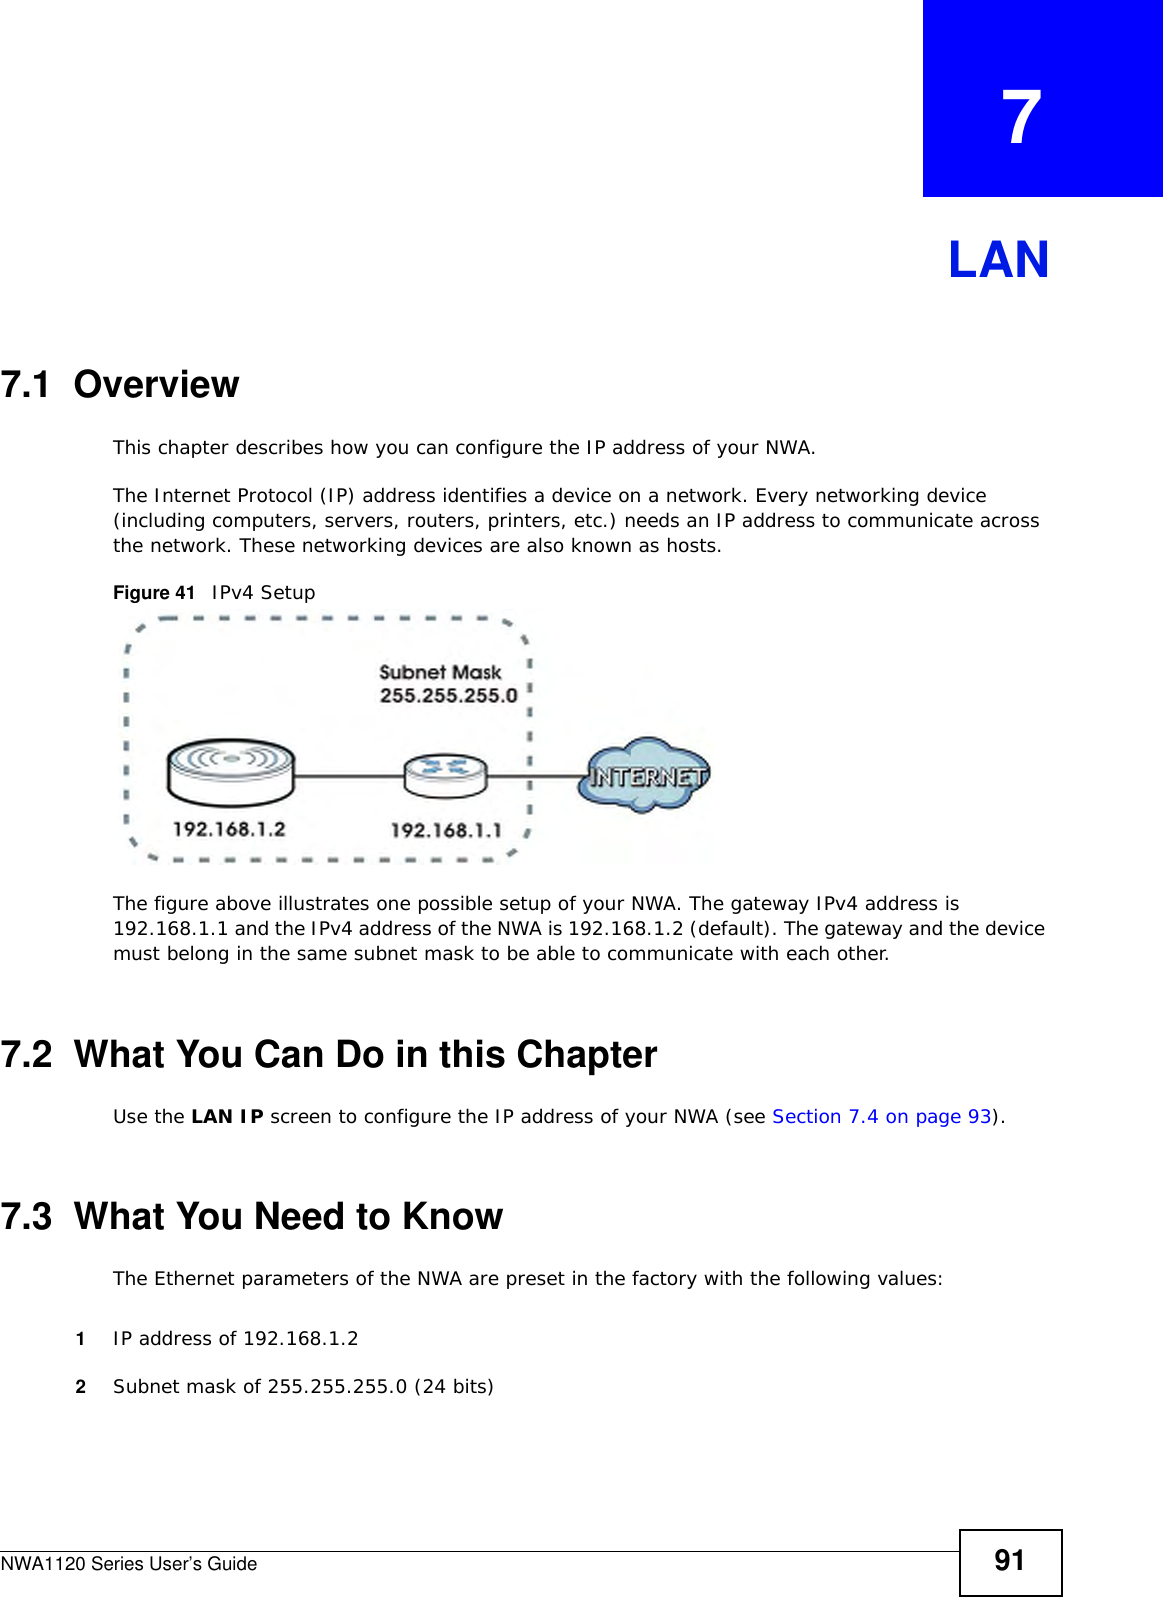 NWA1120 Series User’s Guide 91CHAPTER   7LAN7.1  OverviewThis chapter describes how you can configure the IP address of your NWA.The Internet Protocol (IP) address identifies a device on a network. Every networking device (including computers, servers, routers, printers, etc.) needs an IP address to communicate across the network. These networking devices are also known as hosts.Figure 41   IPv4 SetupThe figure above illustrates one possible setup of your NWA. The gateway IPv4 address is 192.168.1.1 and the IPv4 address of the NWA is 192.168.1.2 (default). The gateway and the device must belong in the same subnet mask to be able to communicate with each other.7.2  What You Can Do in this ChapterUse the LAN IP screen to configure the IP address of your NWA (see Section 7.4 on page 93).7.3  What You Need to KnowThe Ethernet parameters of the NWA are preset in the factory with the following values:1IP address of 192.168.1.22Subnet mask of 255.255.255.0 (24 bits)